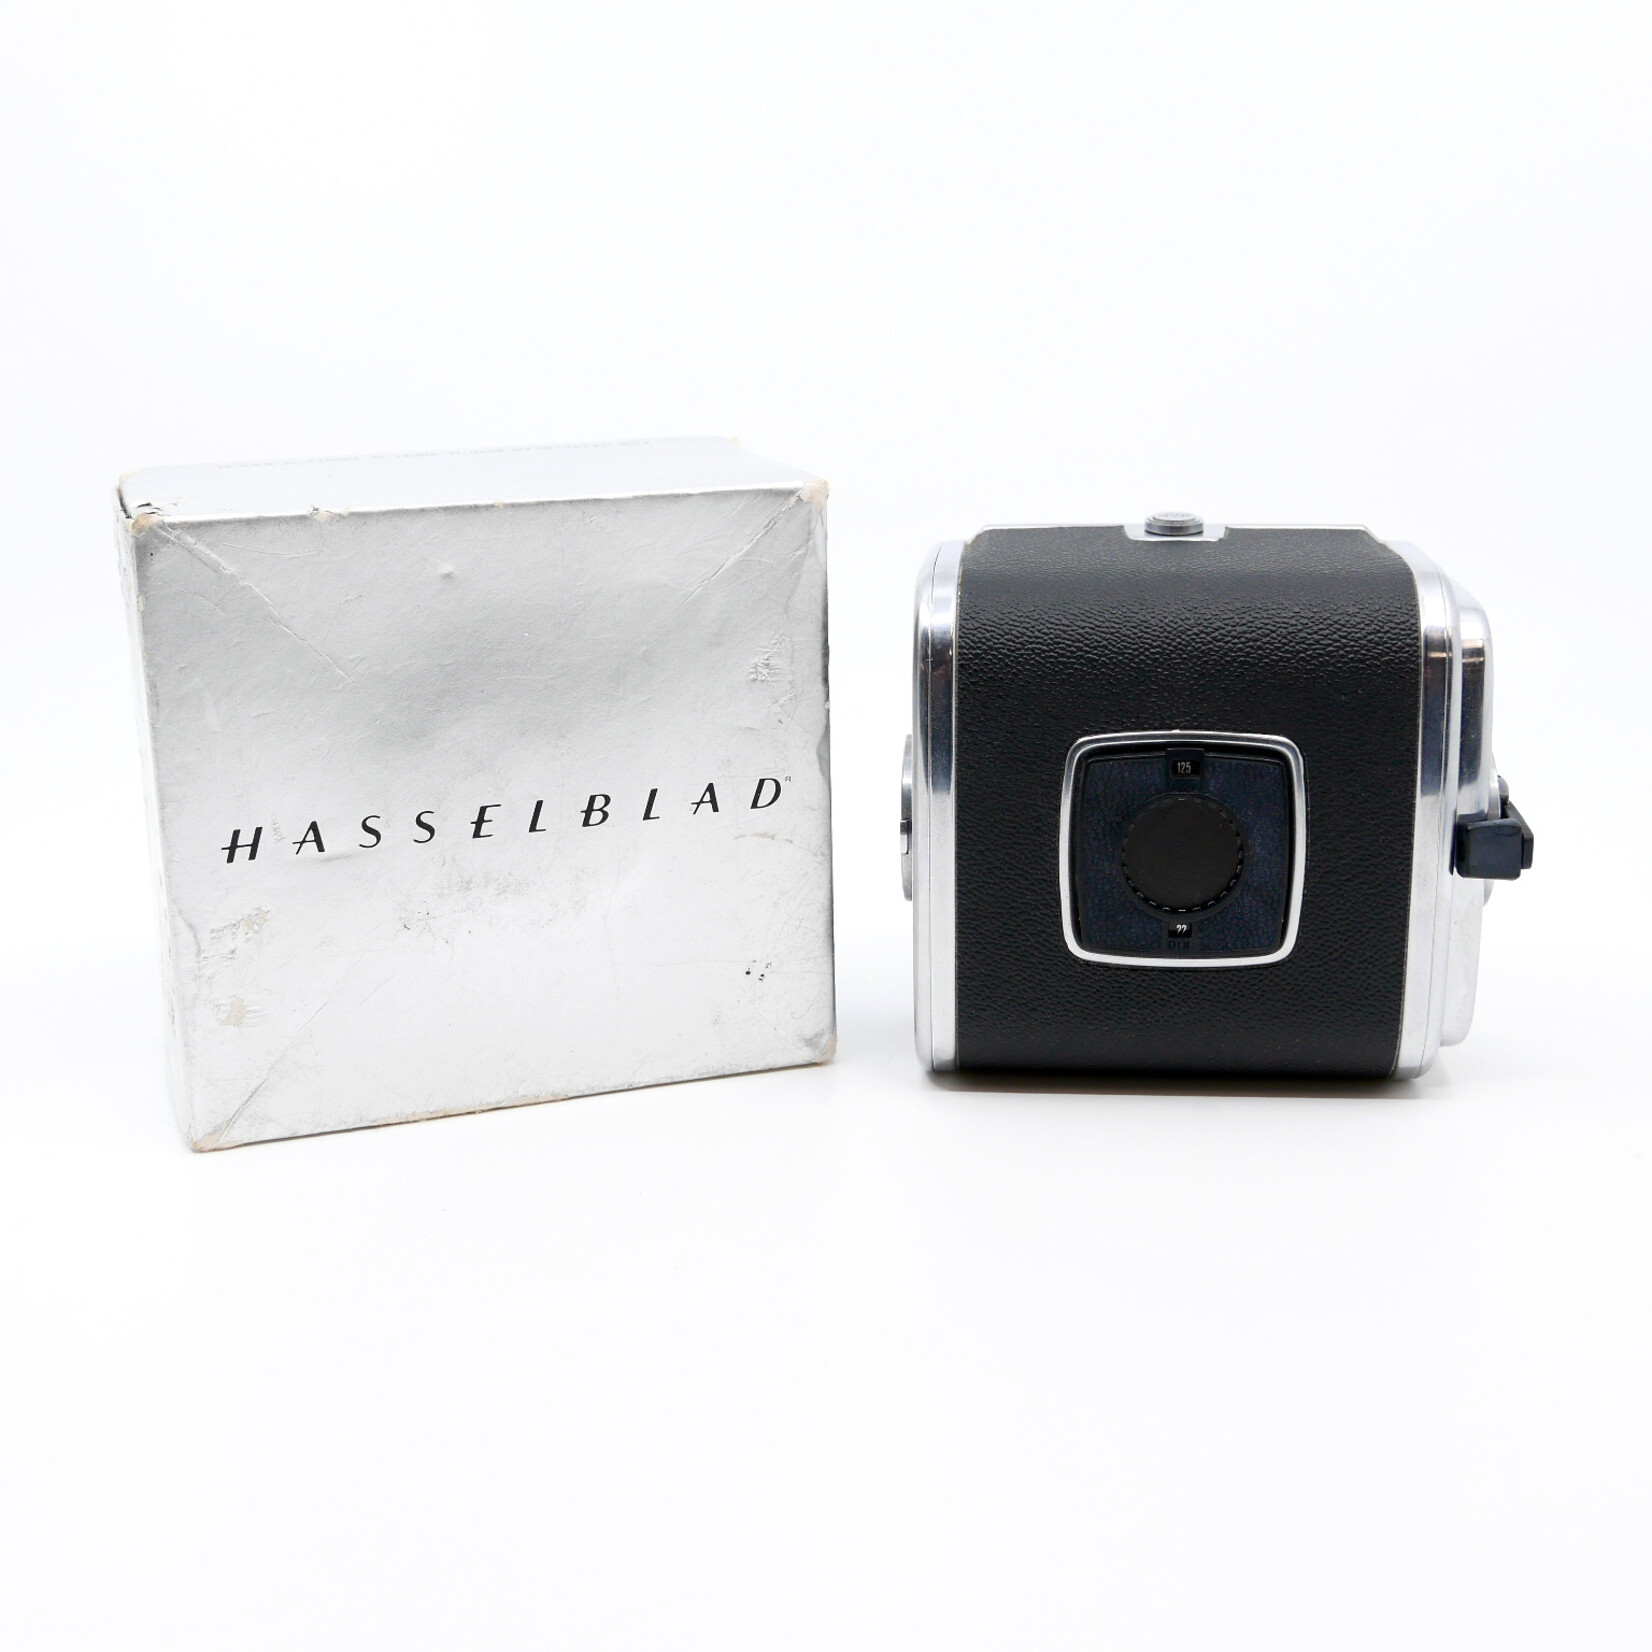 Hasselblad Hasselblad A12 Film Back (Used)